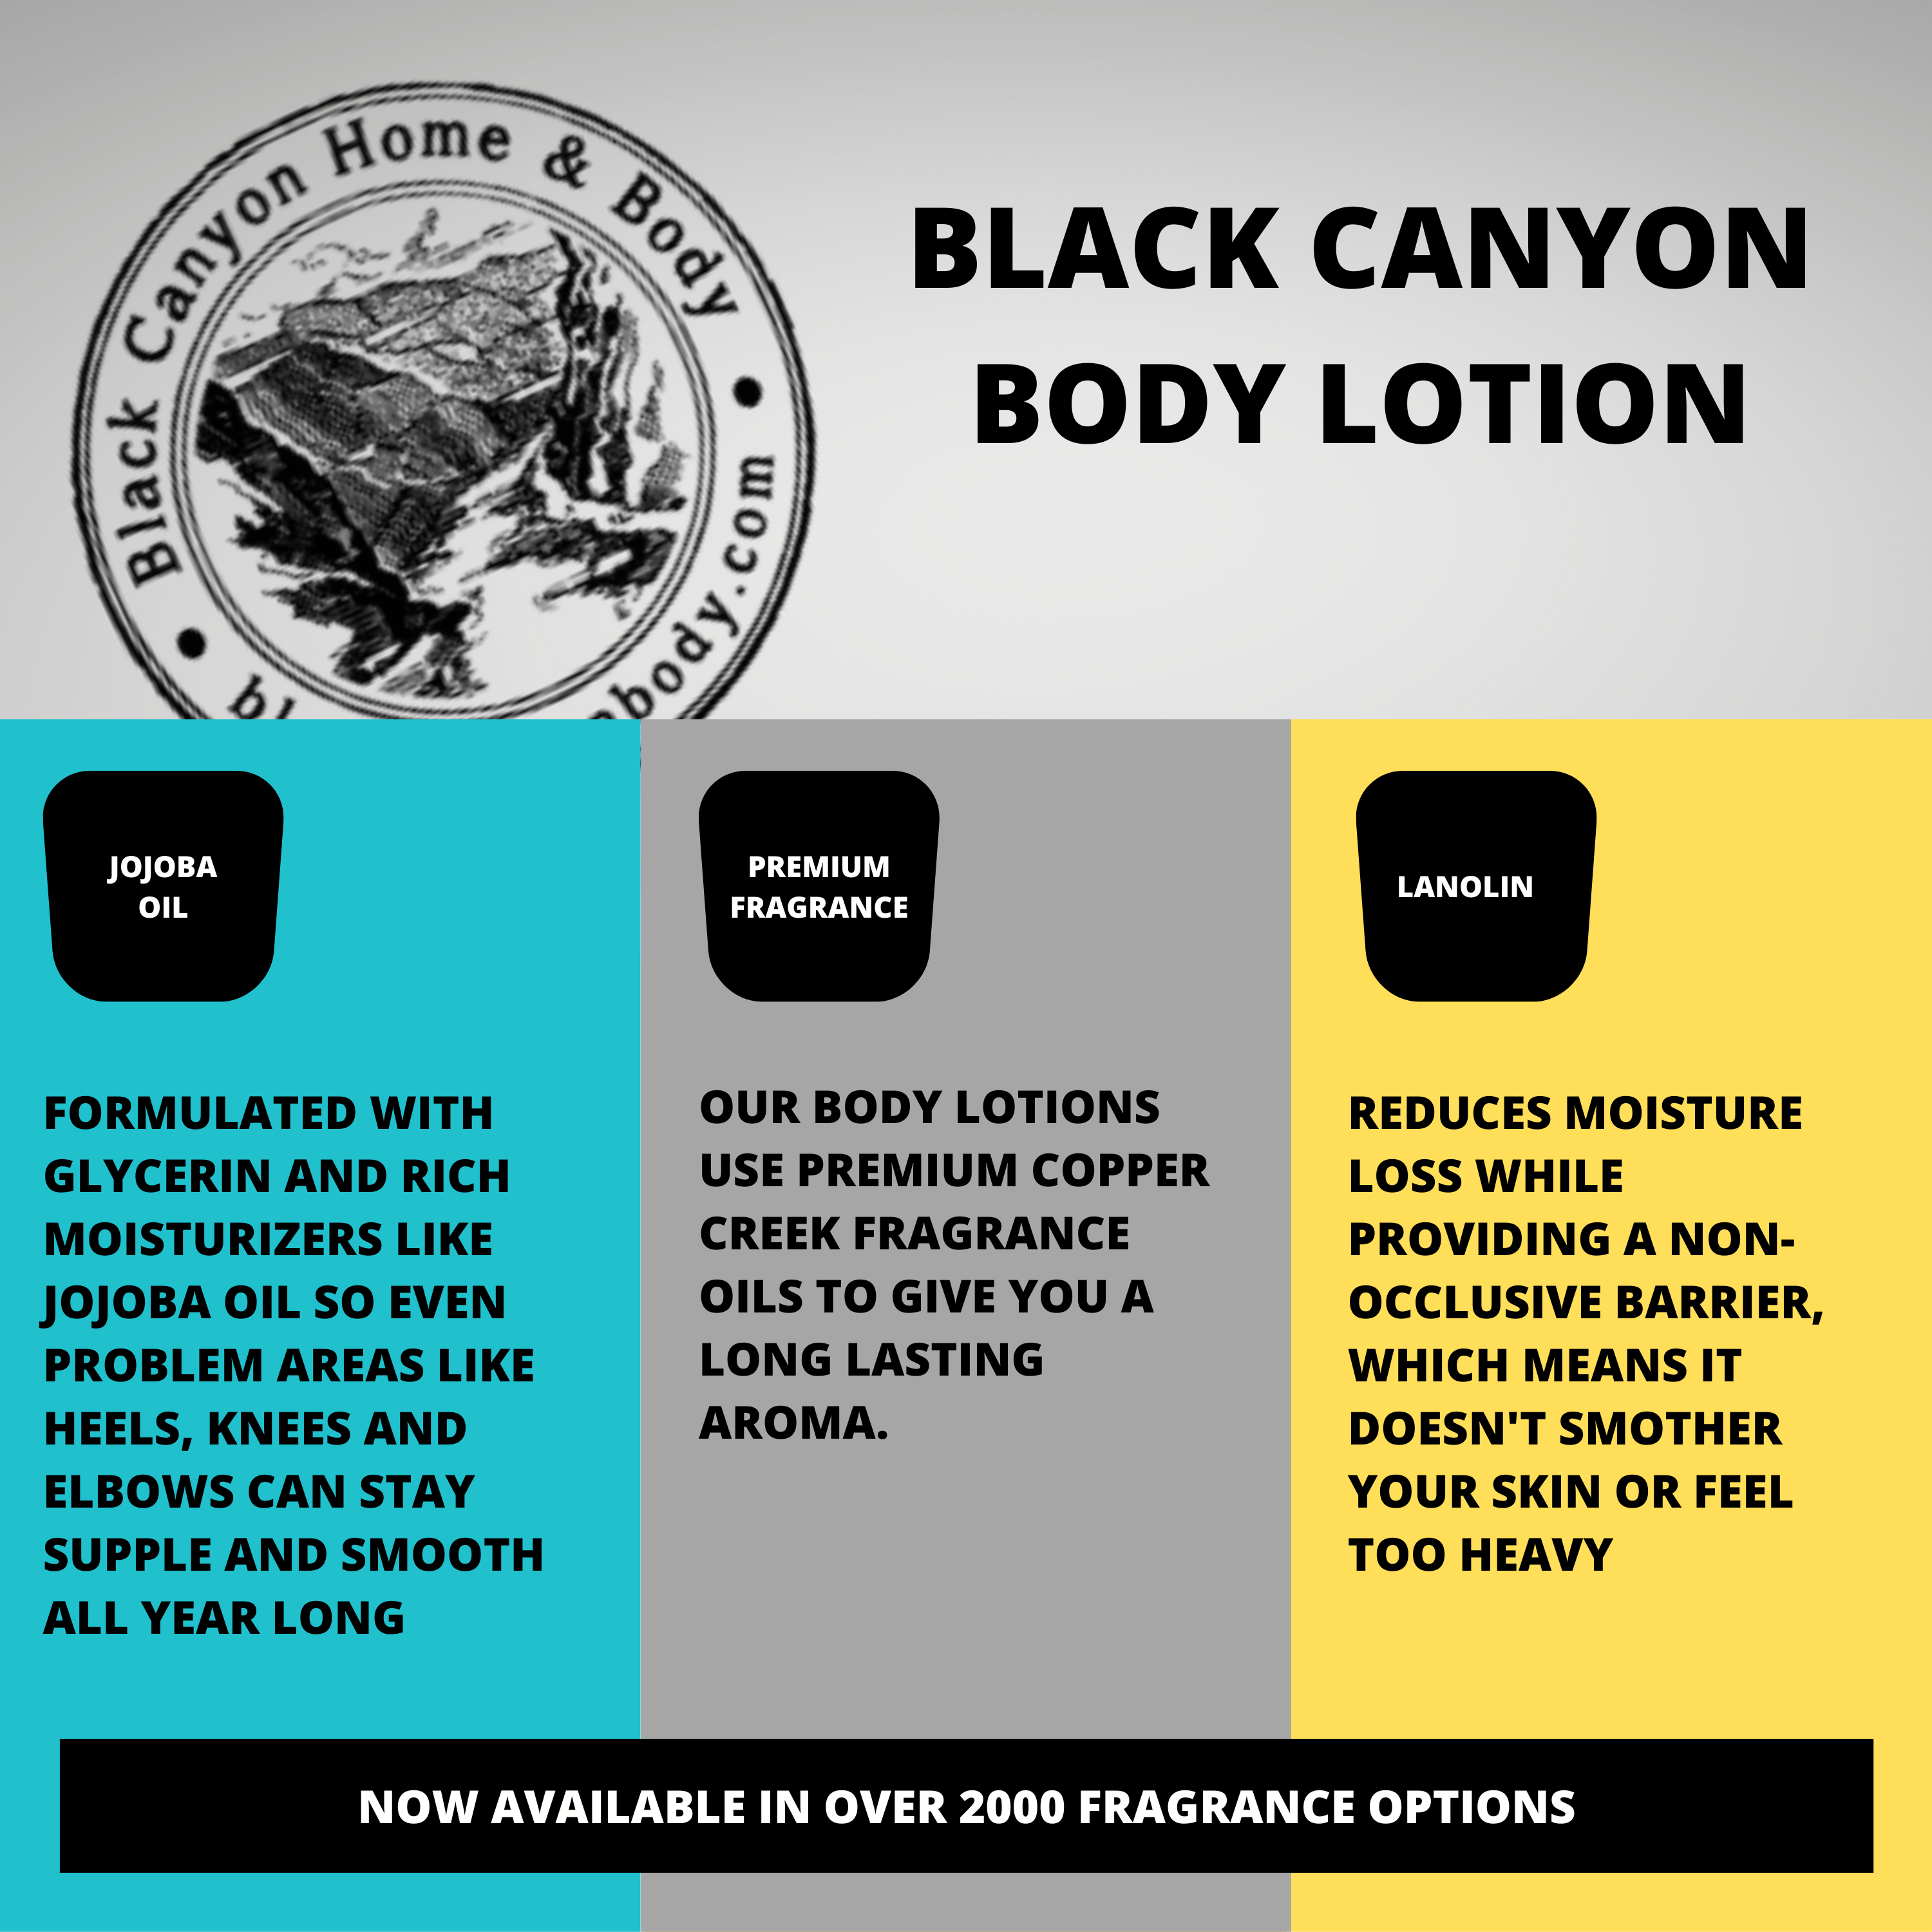 Black Canyon Daisy Mountain Scented Luxury Body Lotion with Lanolin and Jojoba Oil